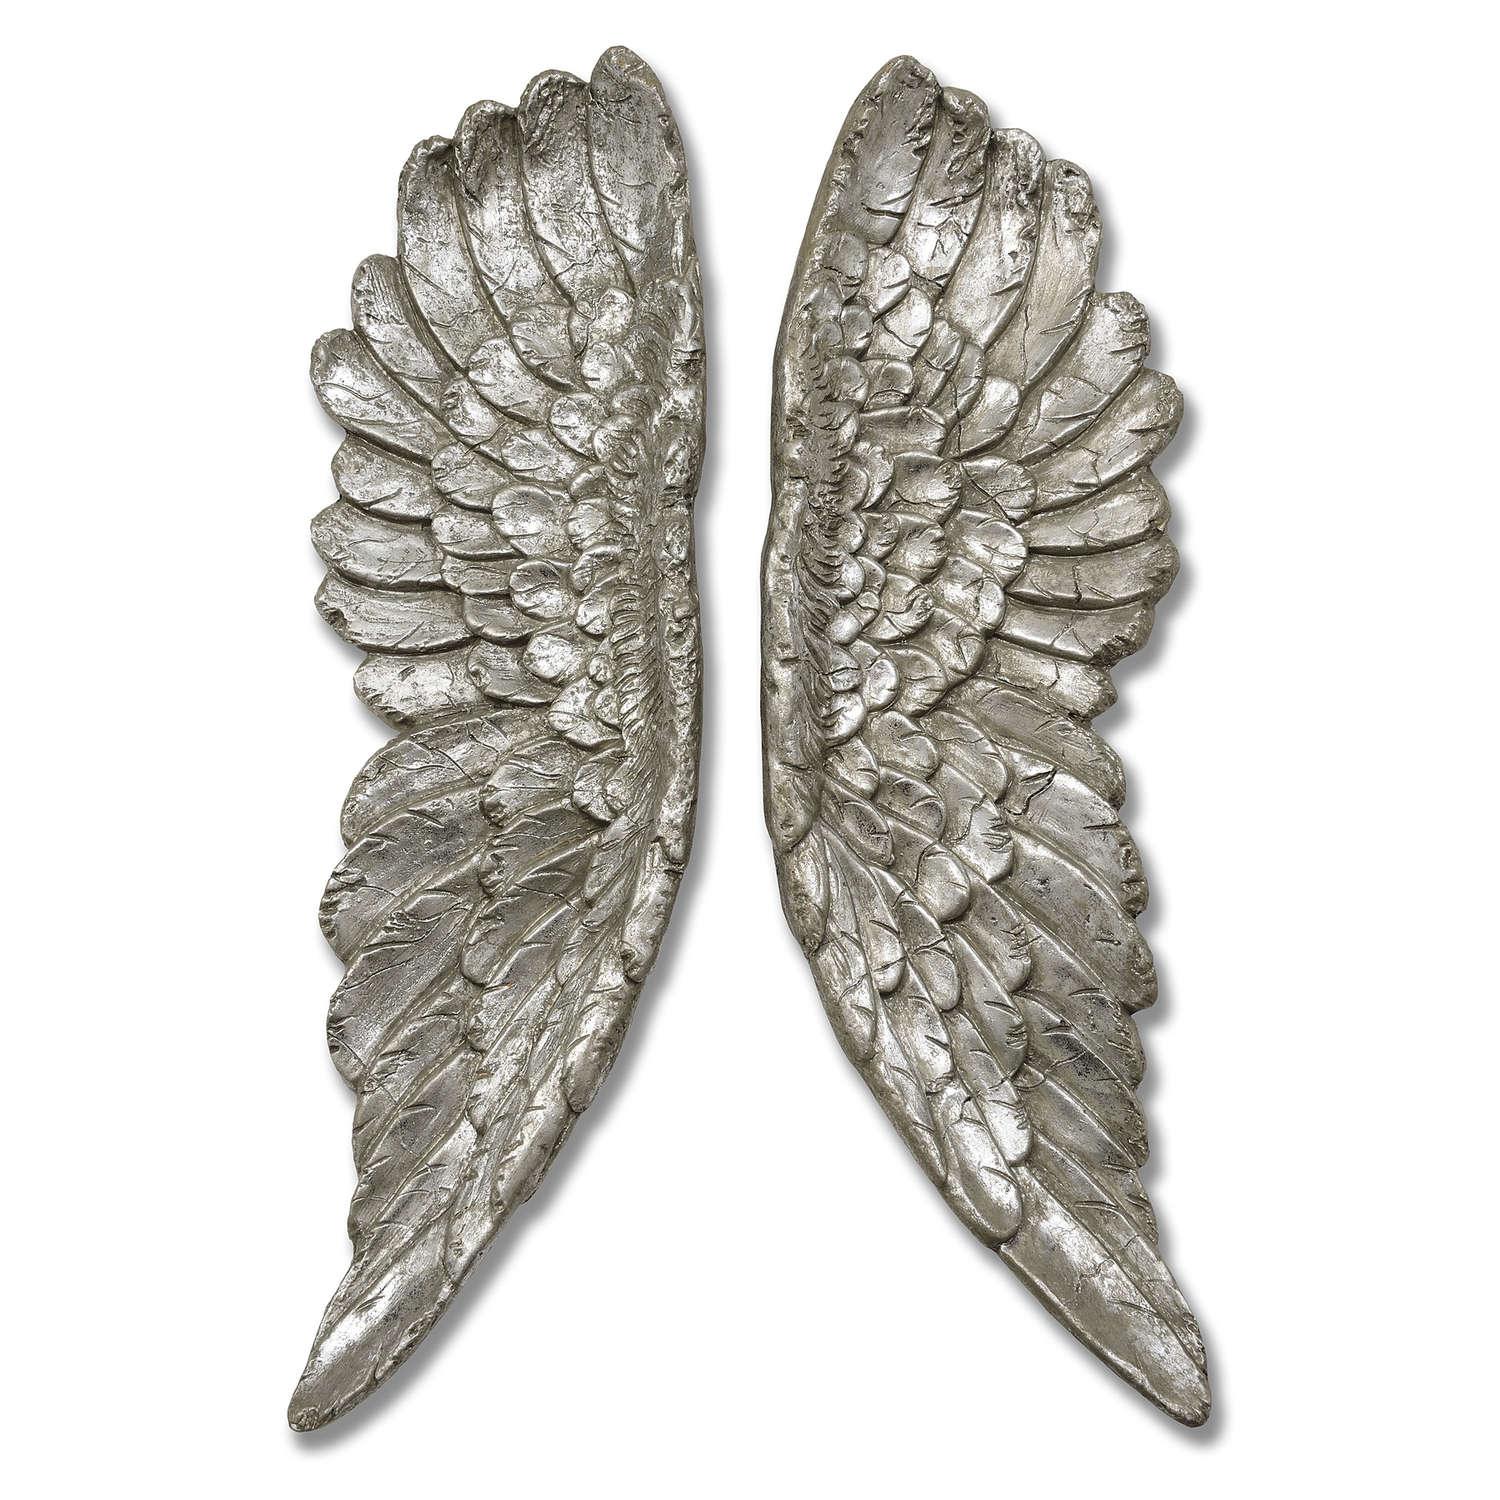 View Antique Silver Angel Wings information